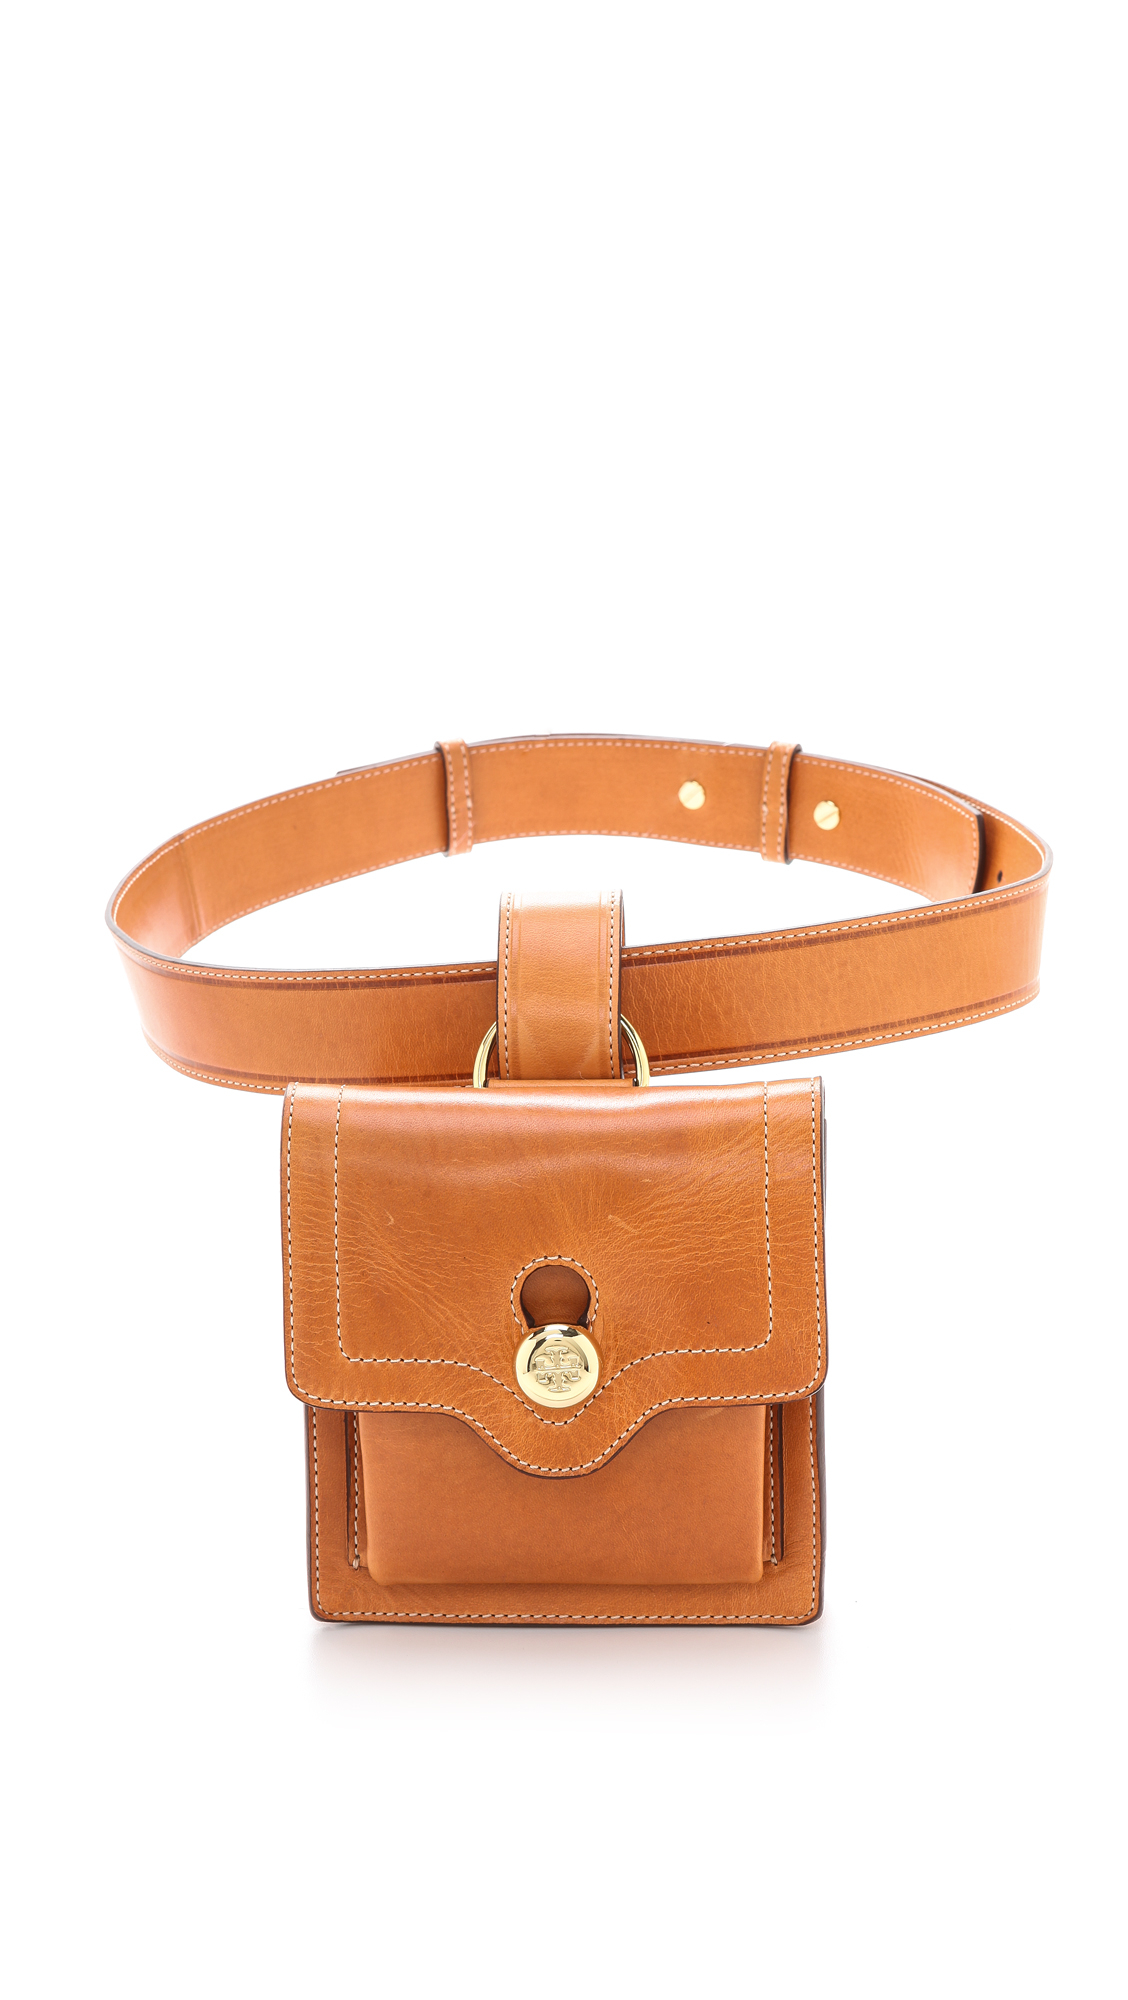 Tory Burch Leather Belt Bag Camello in Brown - Lyst